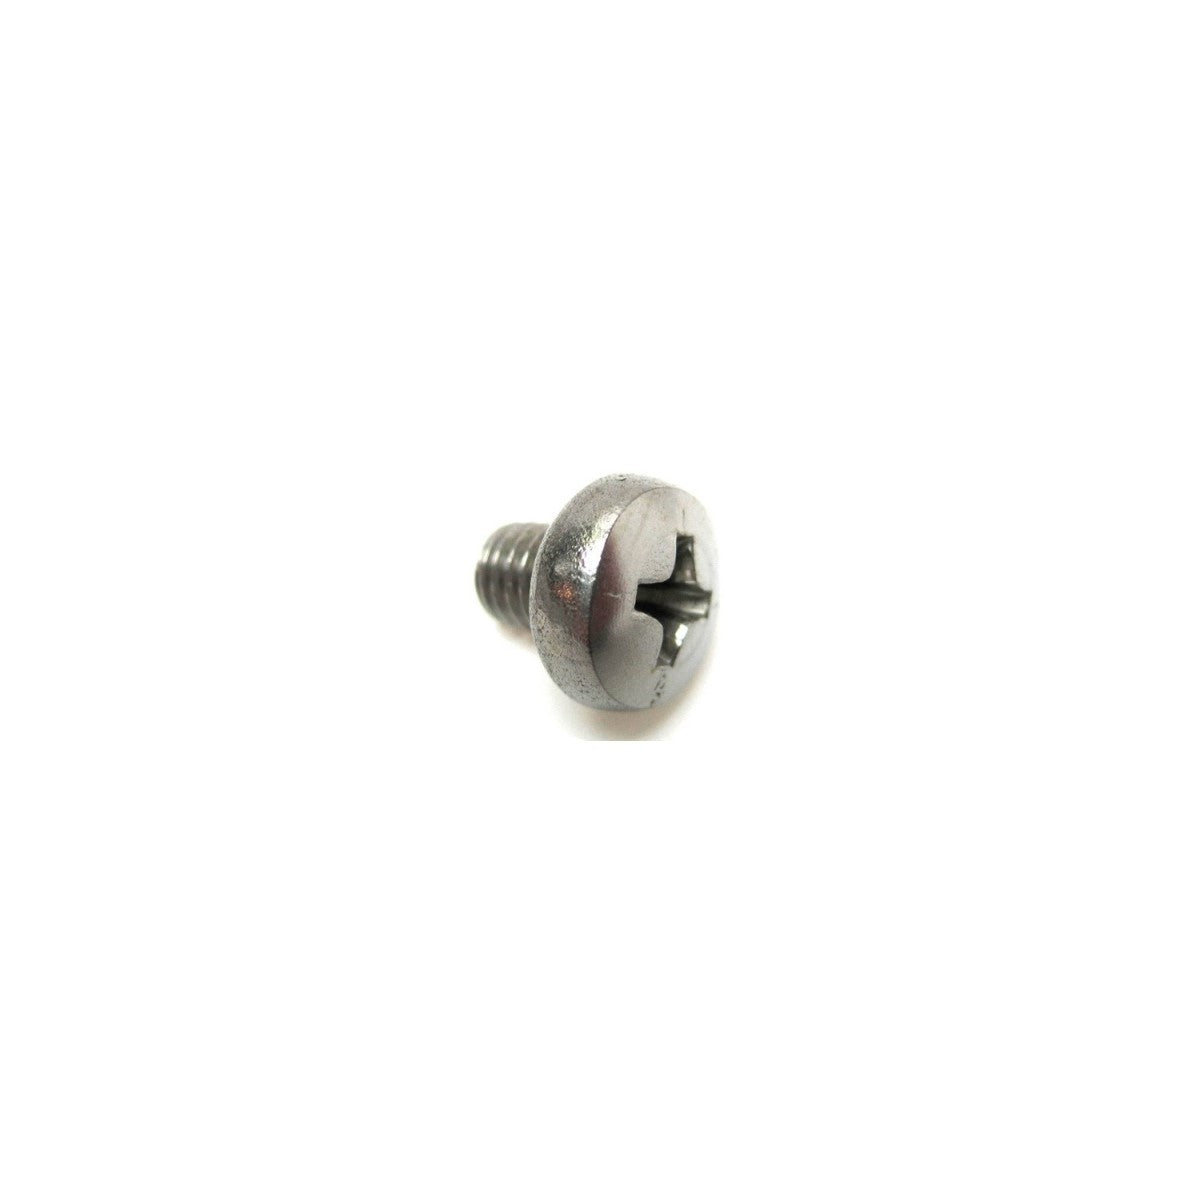 M5 x 6 mm Stainless Steel Phillips Screw